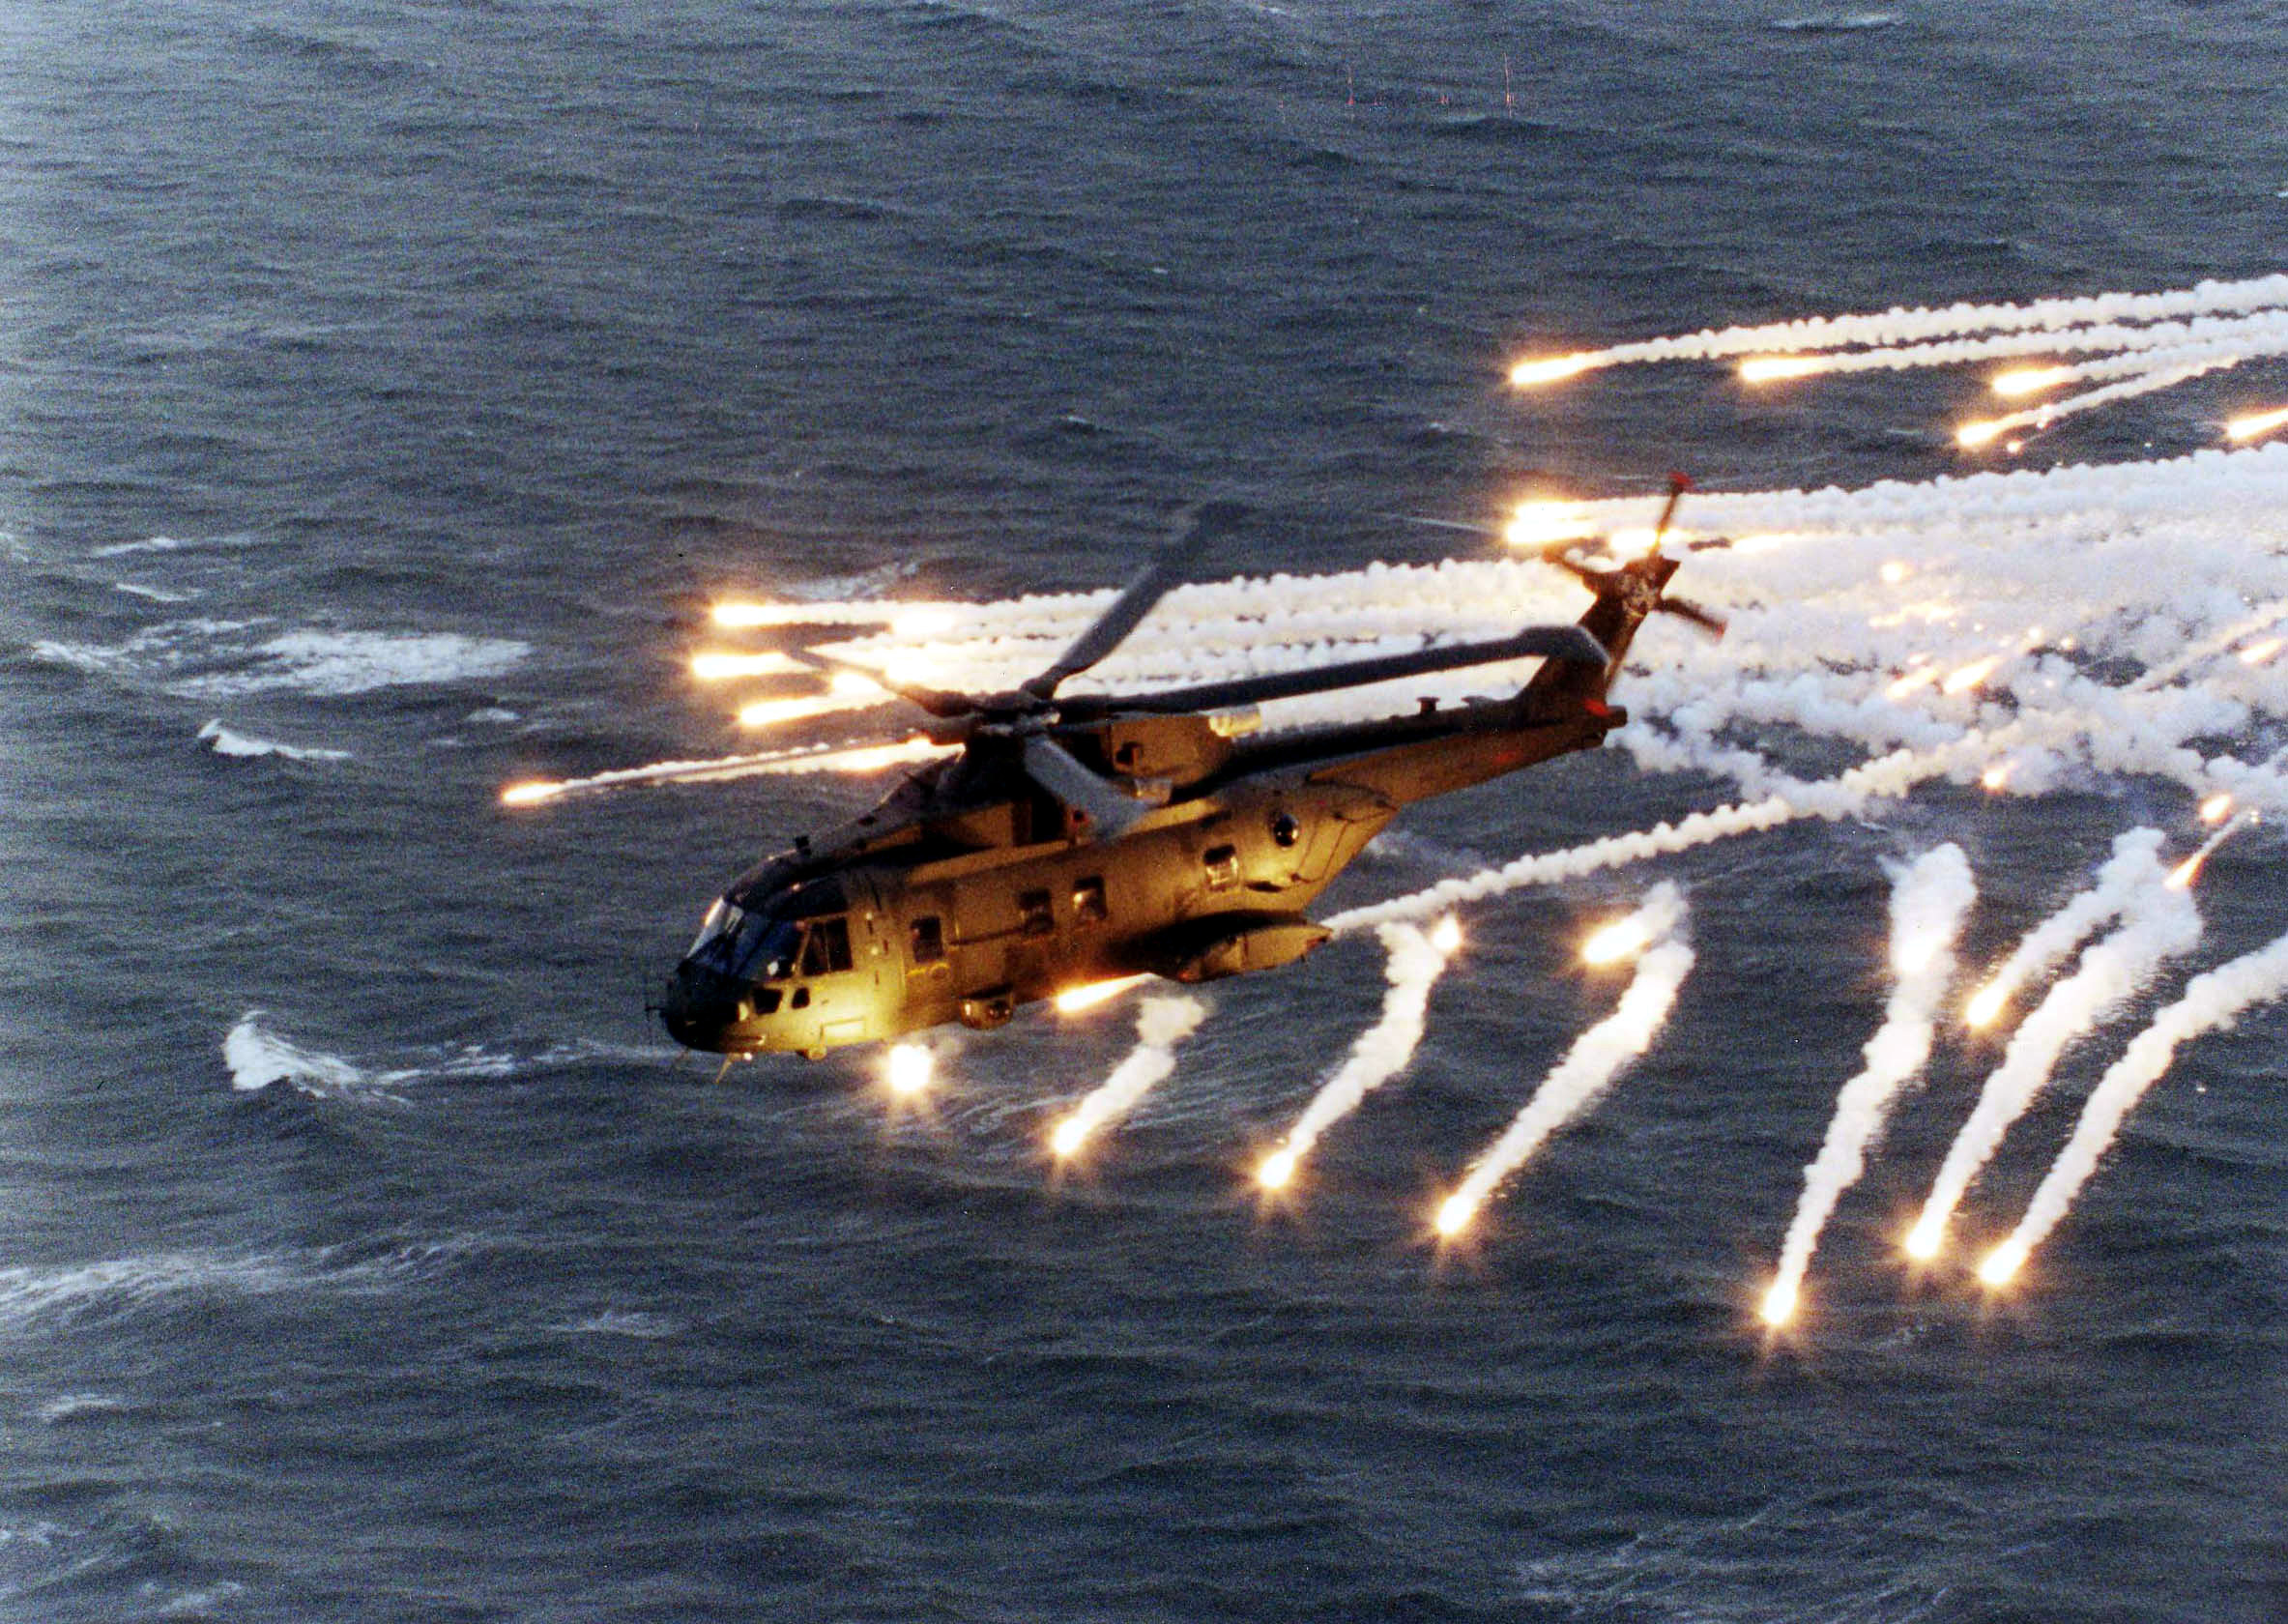 AW101 helicopter